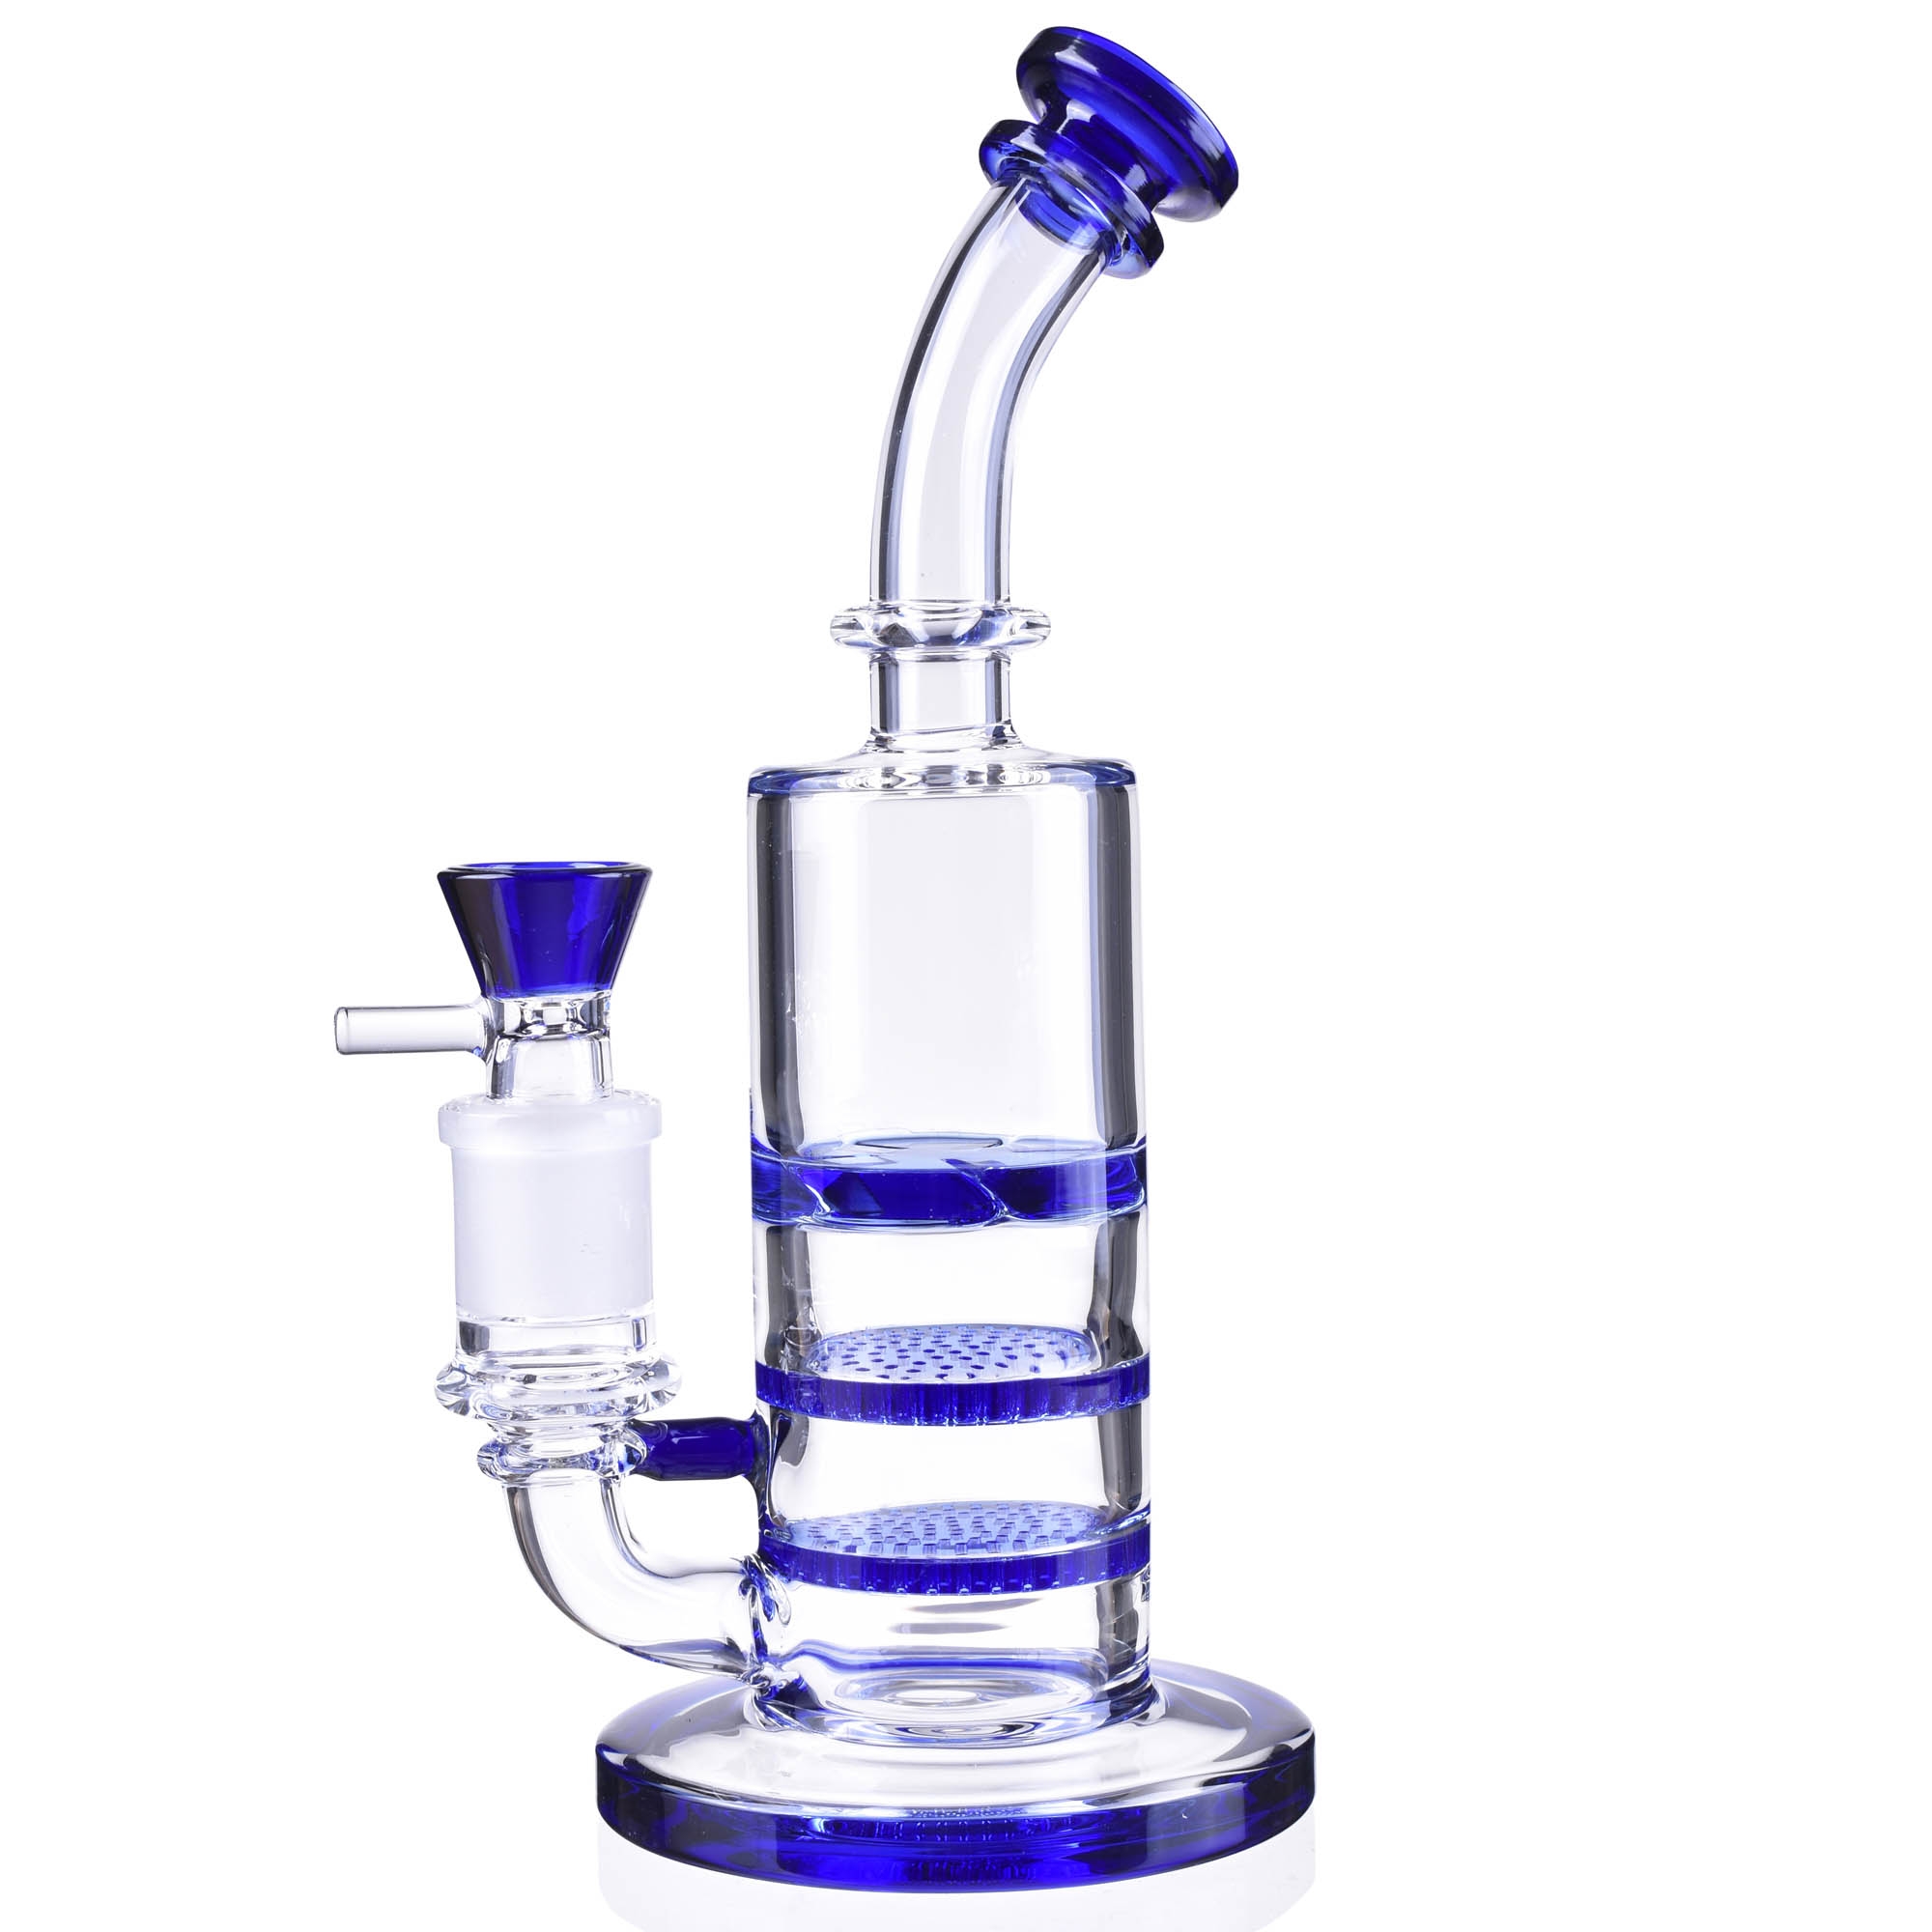 Percolator Bong- Get All the Details Here Accurately!